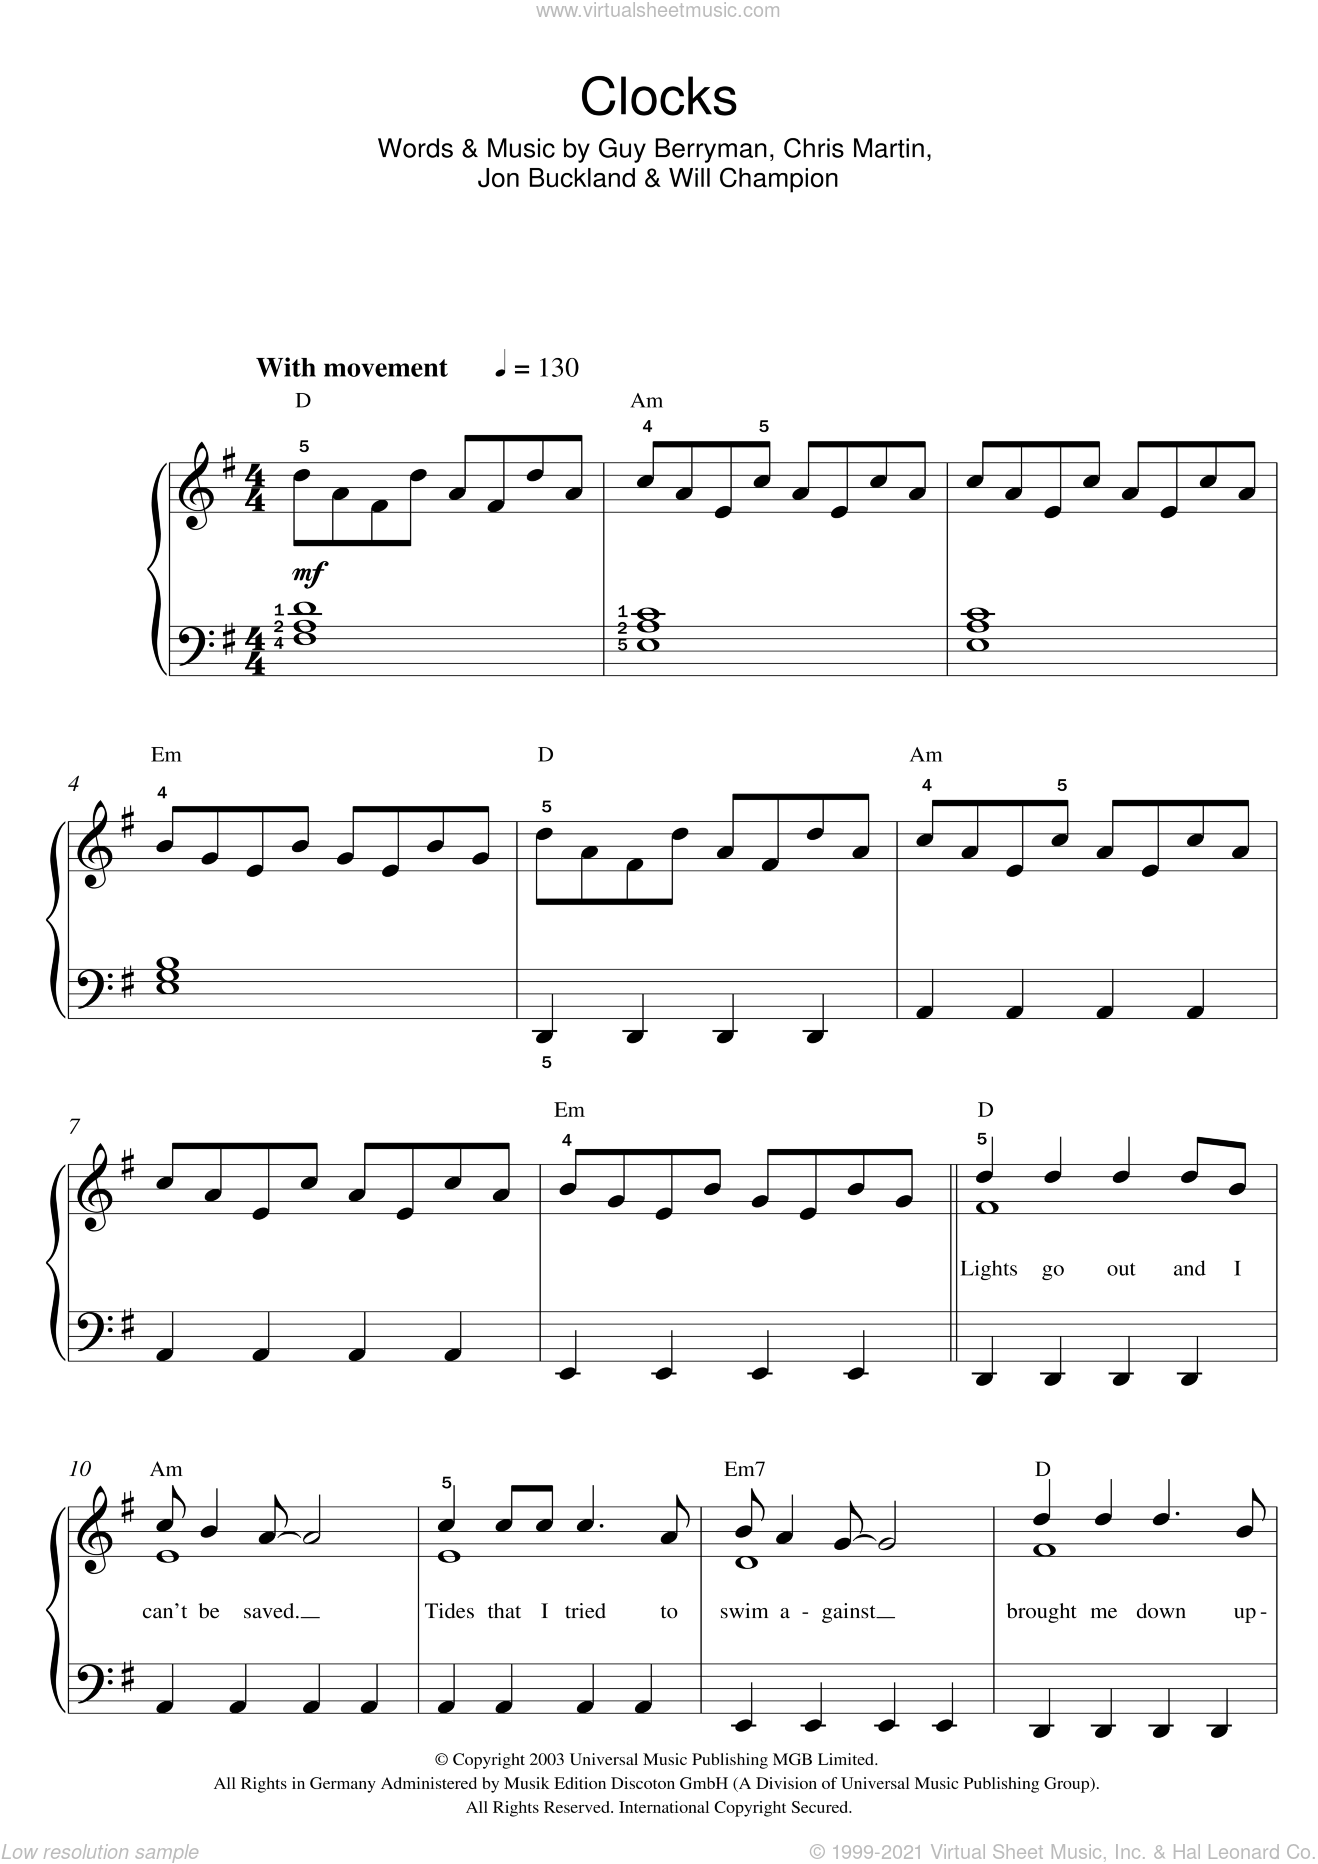 Coldplay - Clocks sheet music for piano solo (beginners)